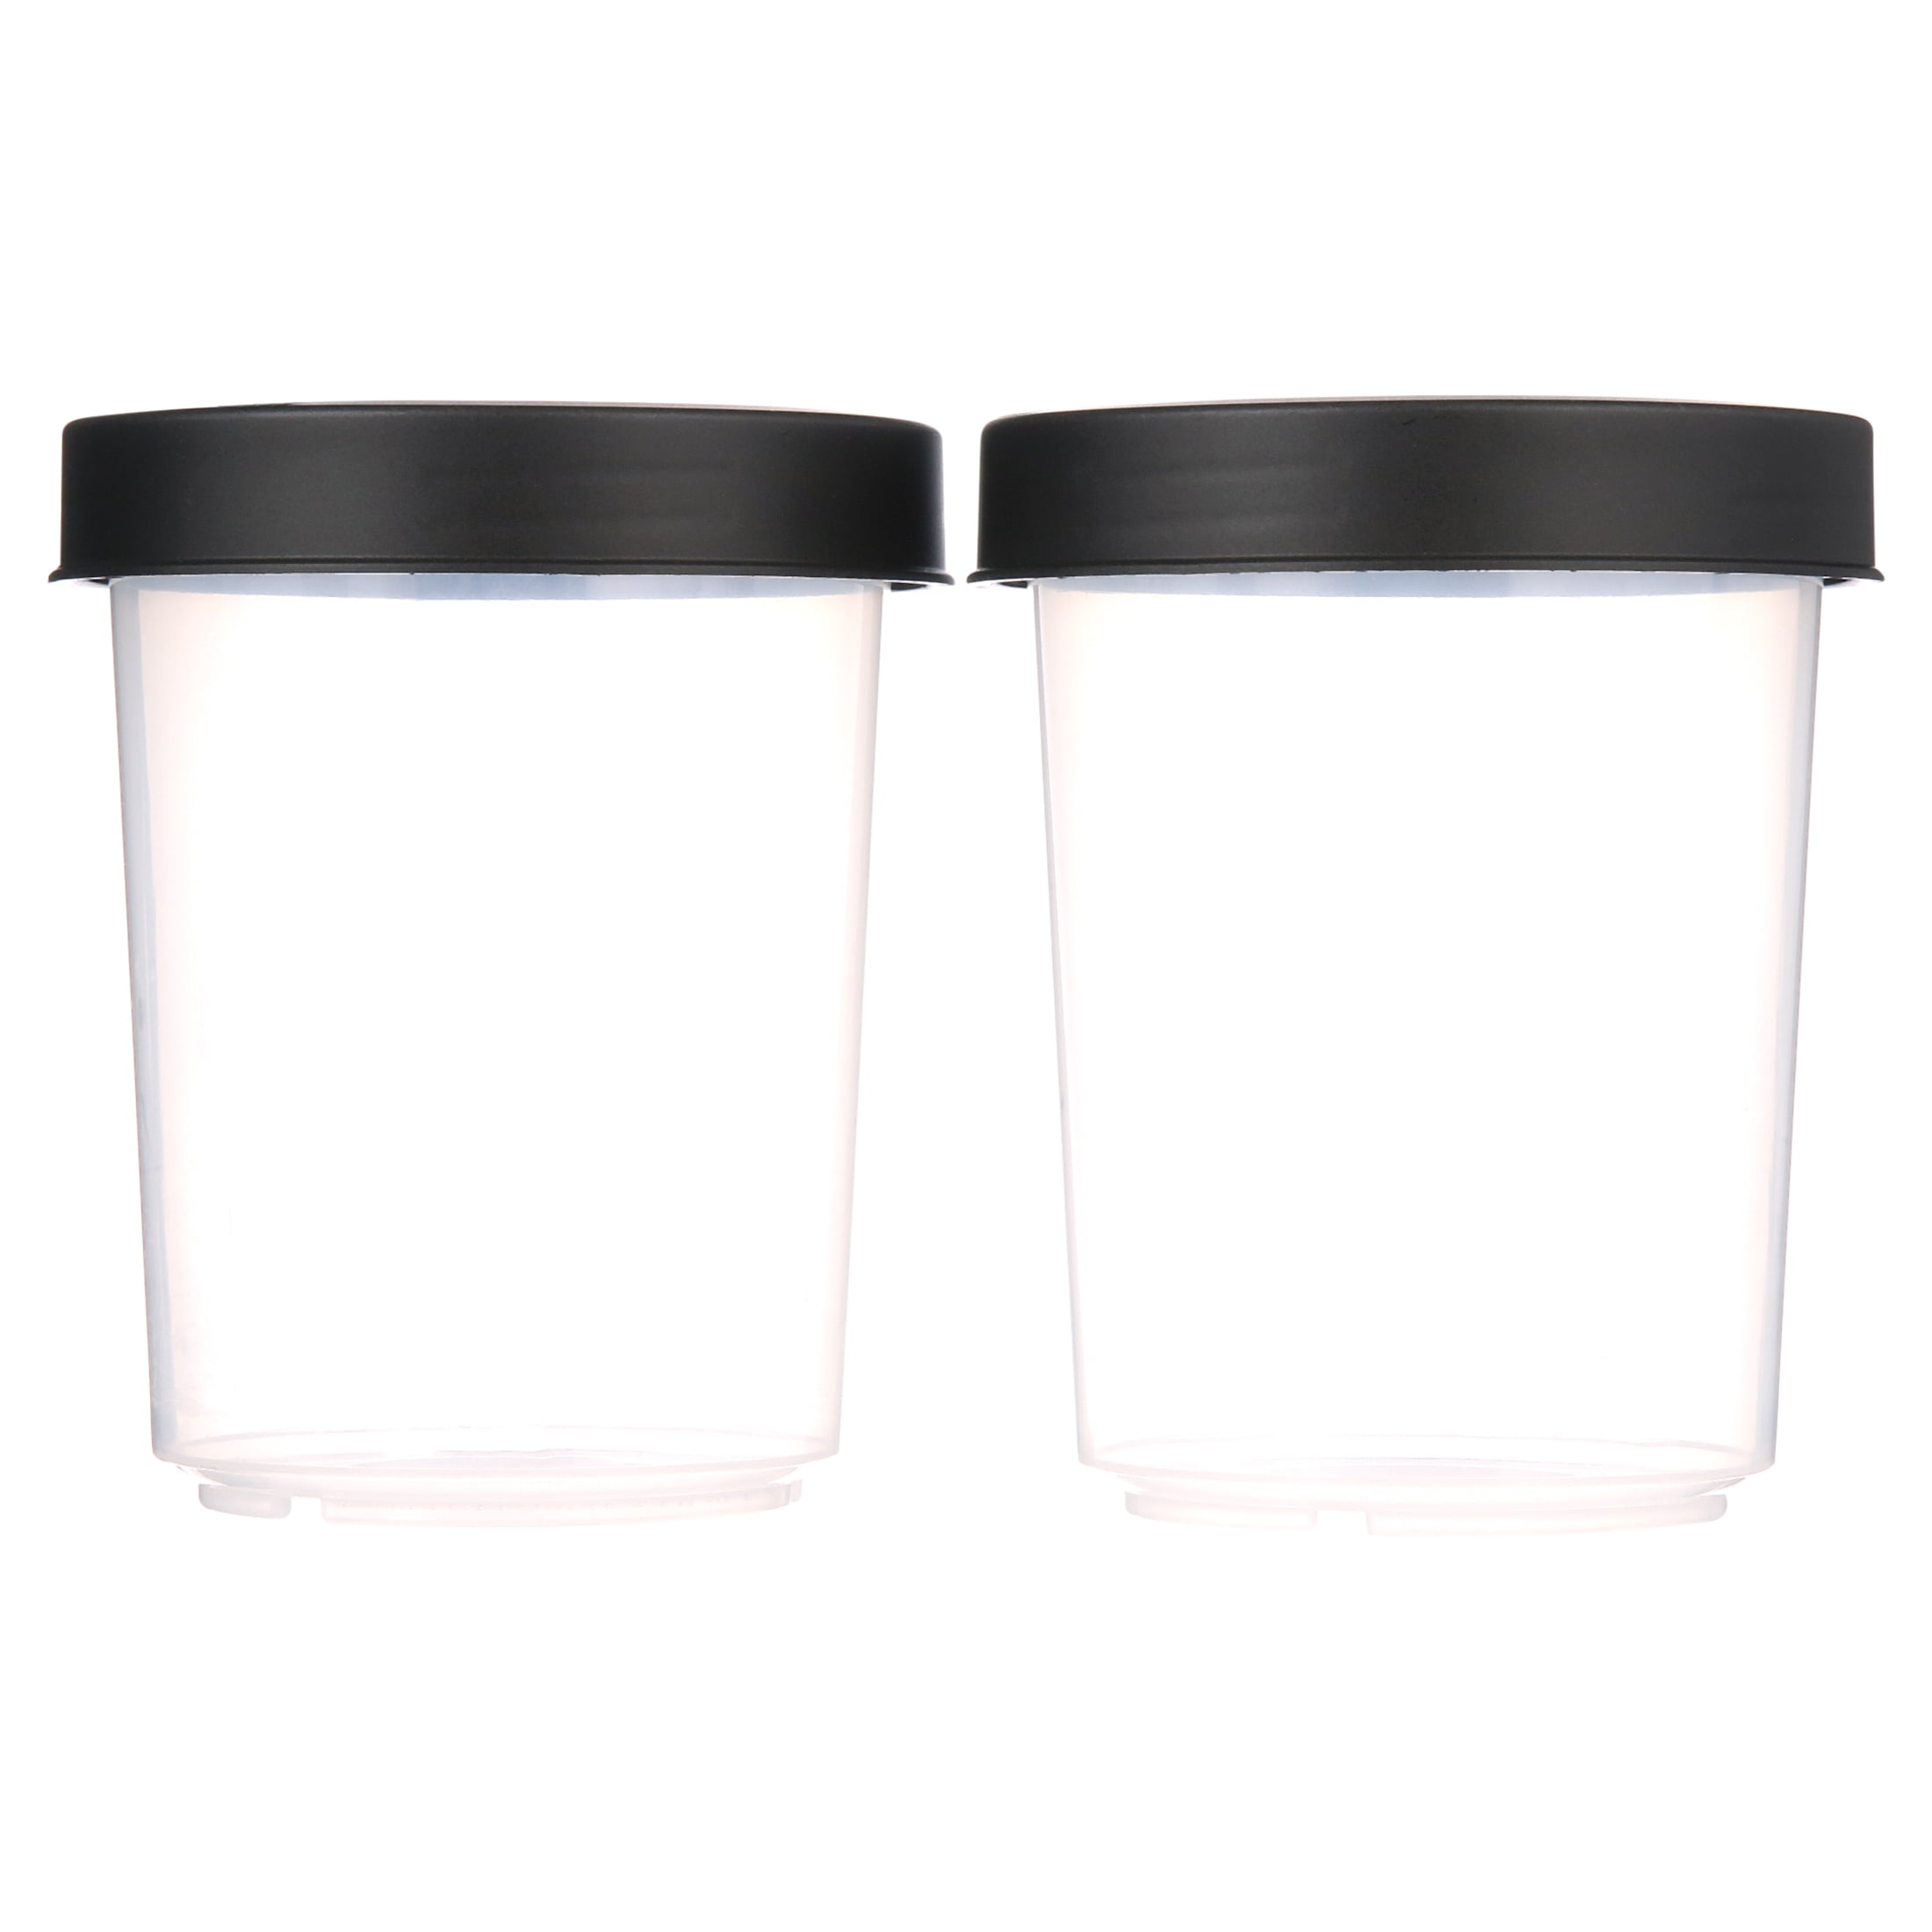 3M™ PPS™ Cup & Collar